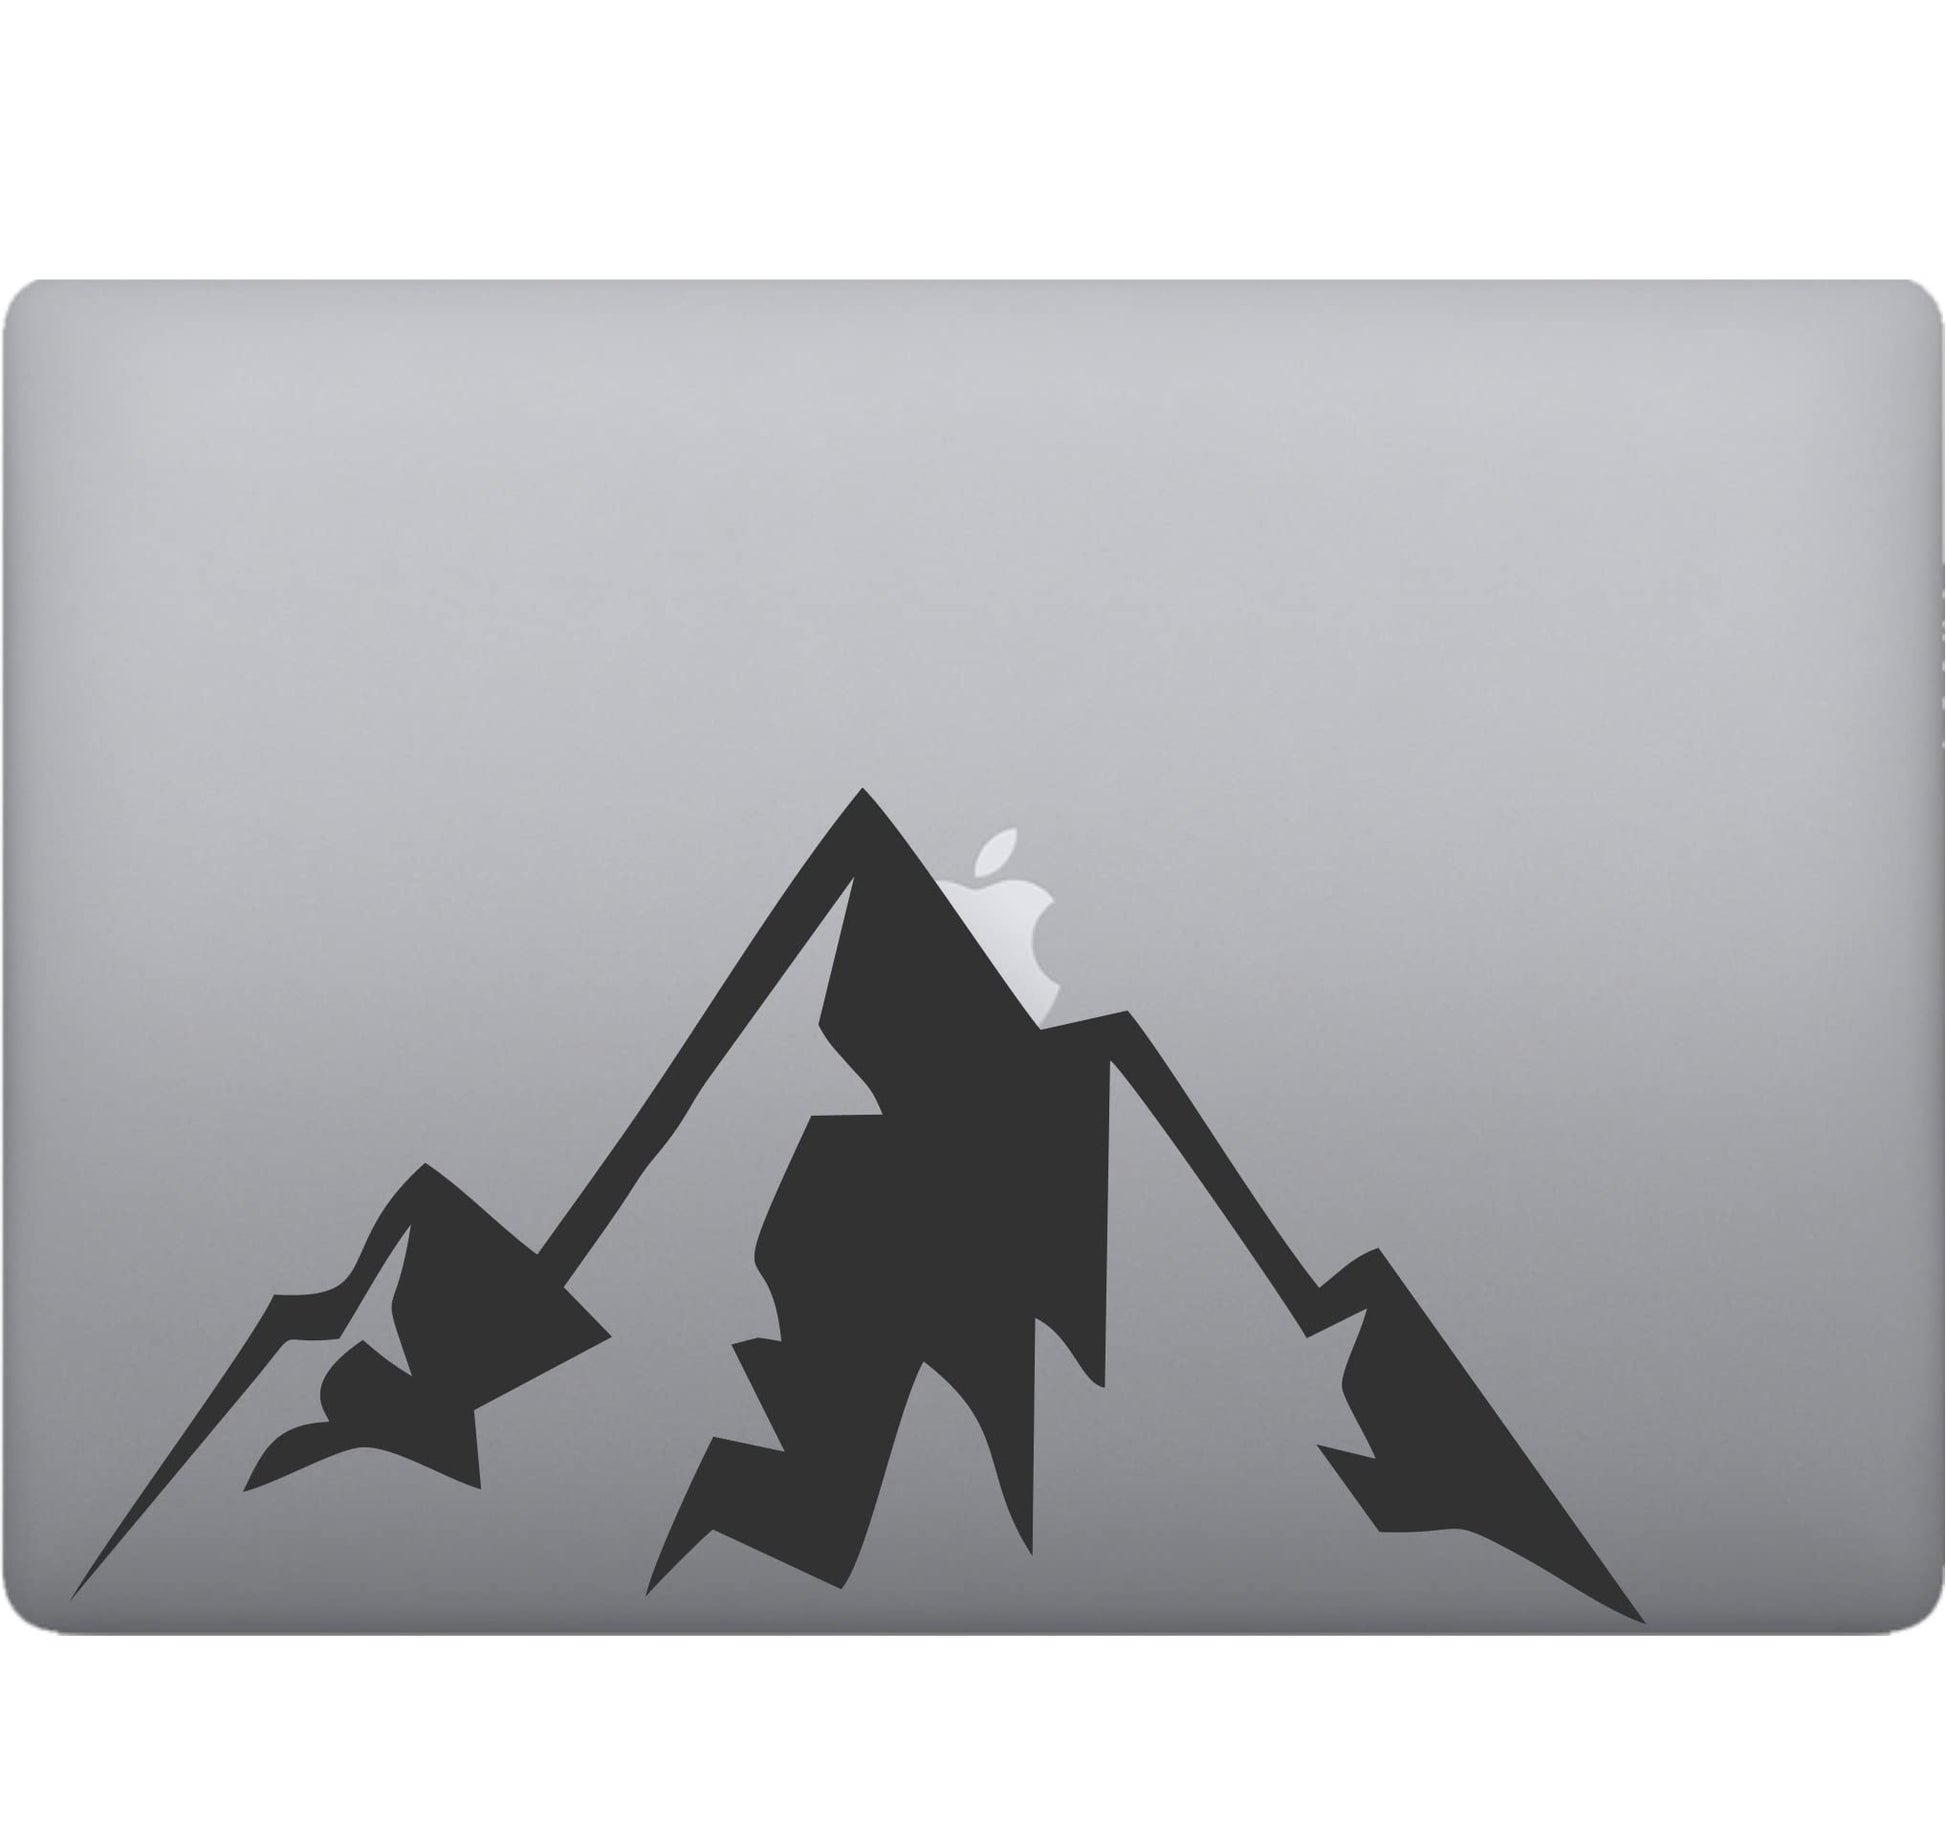 Mountain stickers for pc computer tablet (2 pcs) Laptop Sticker Apple art  decal decal -Vinyl color of your choice COD.P0030